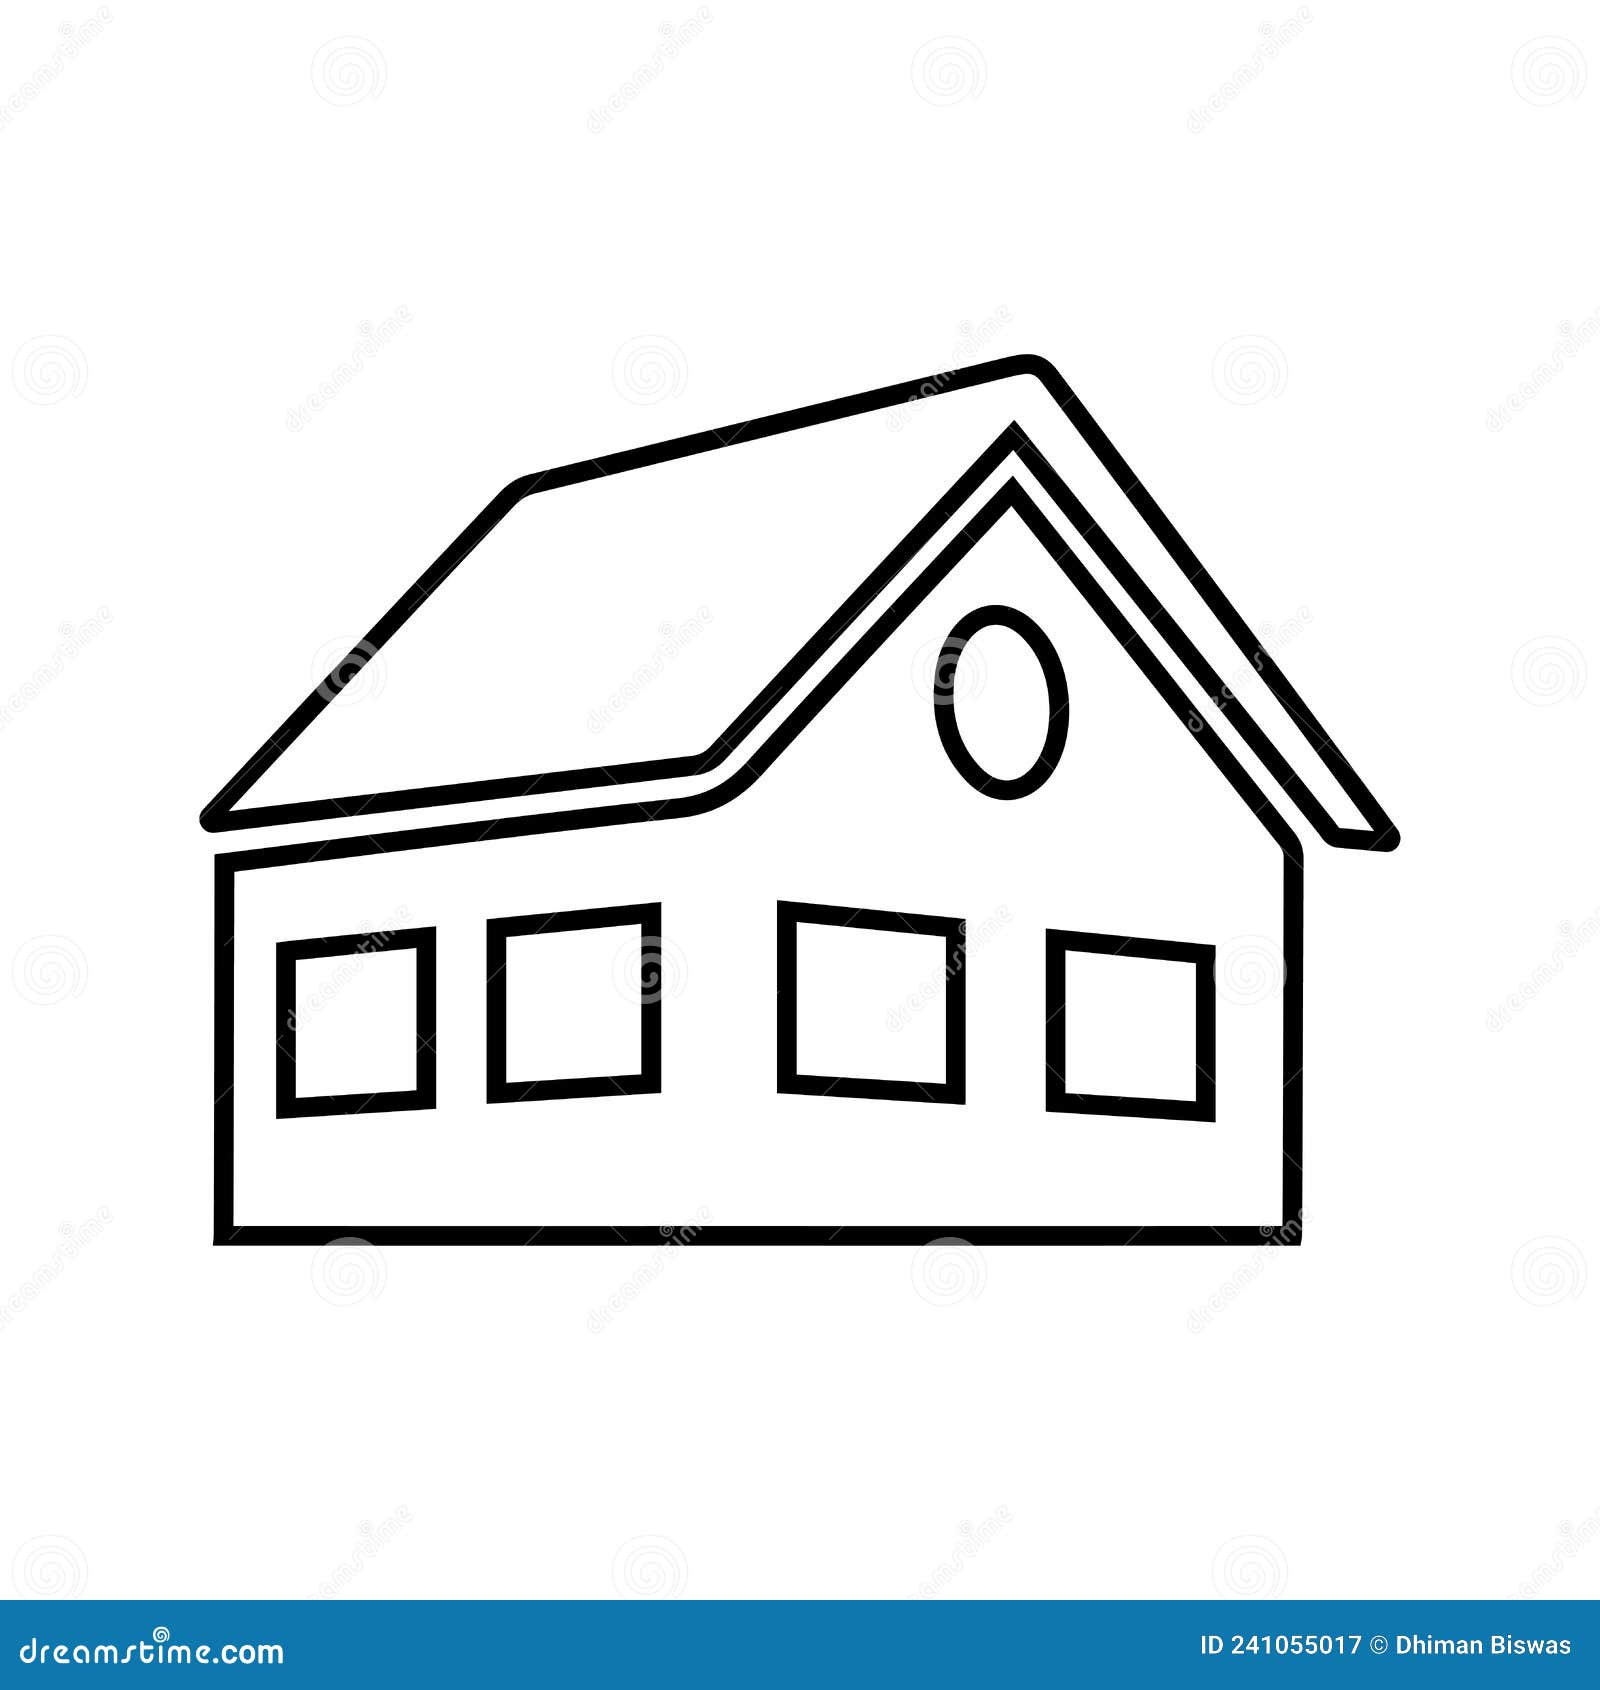 House, Home, Building Outline Icon. Line Art Vector Stock Illustration ...